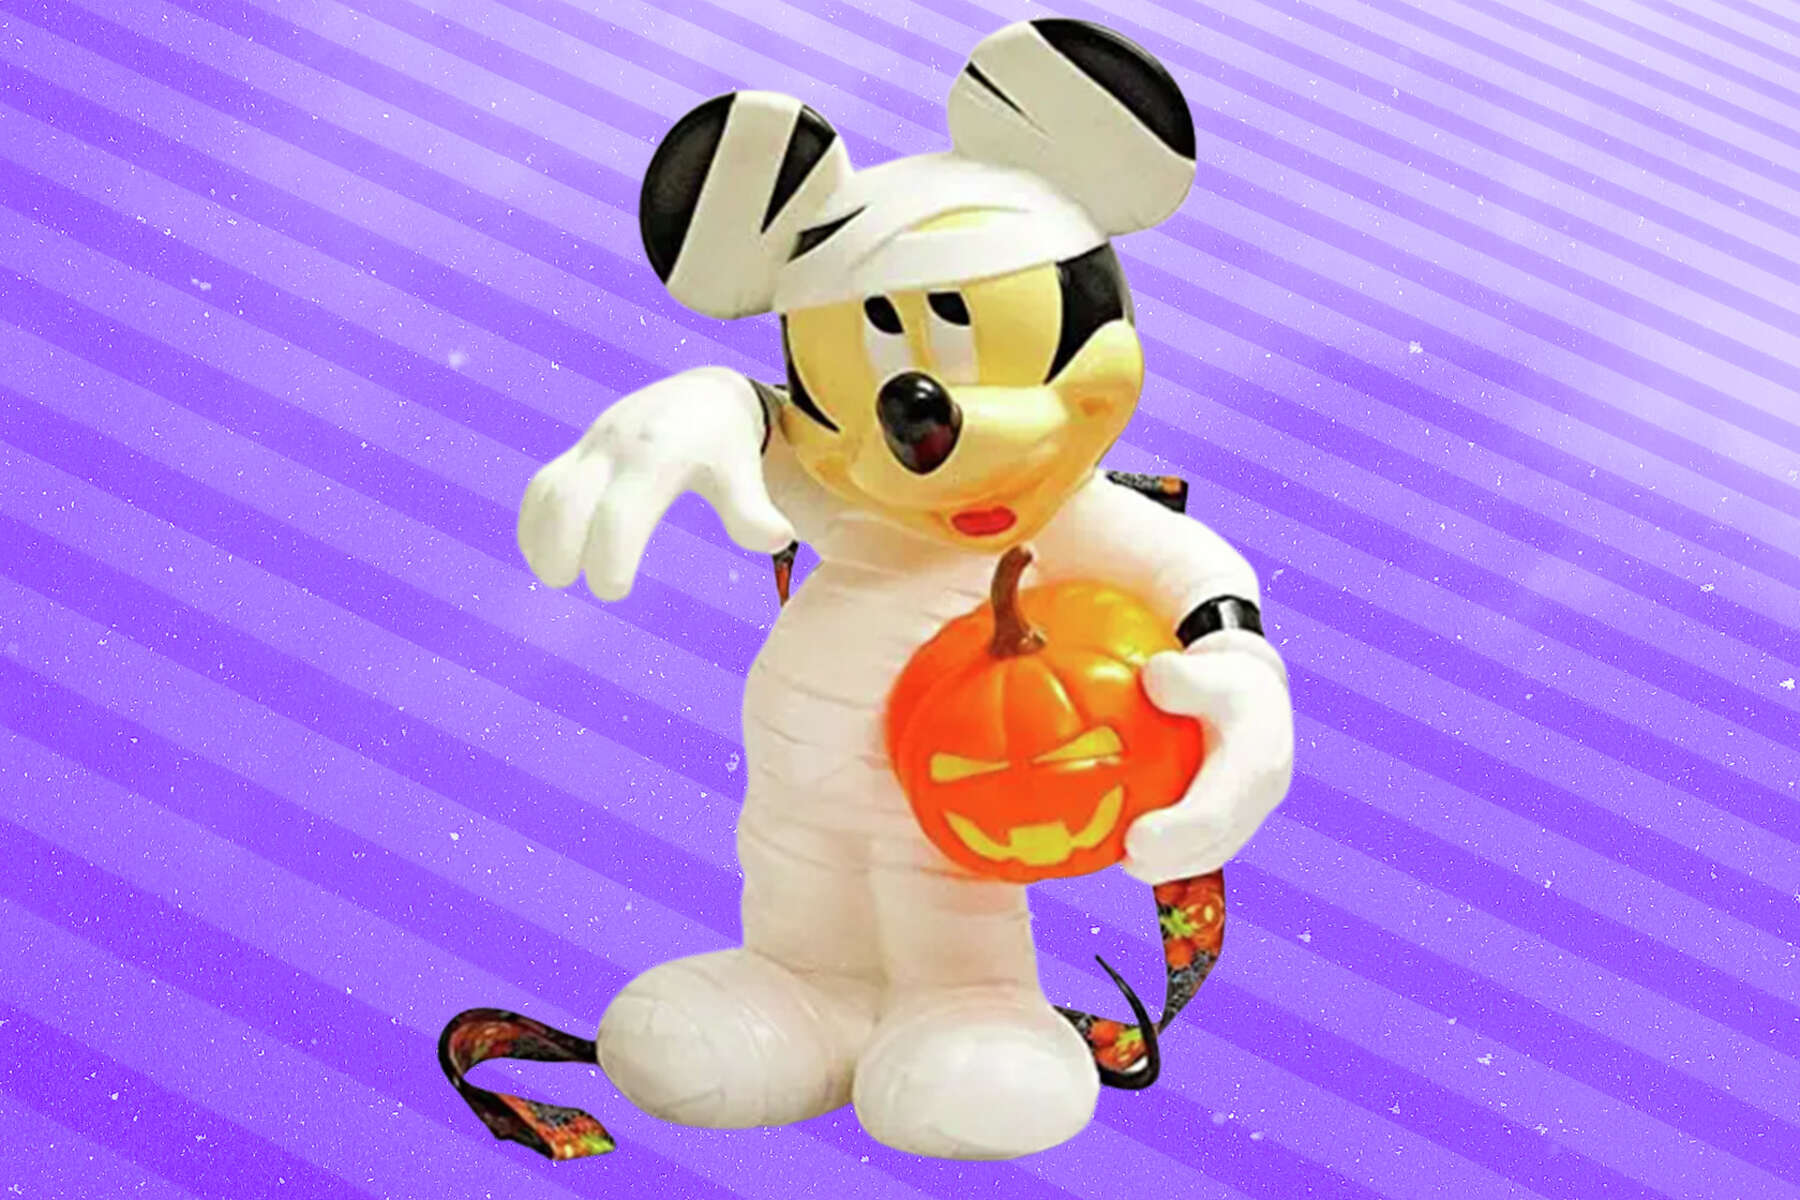 This Mickey Mouse mummy popcorn bucket is all over TikTok